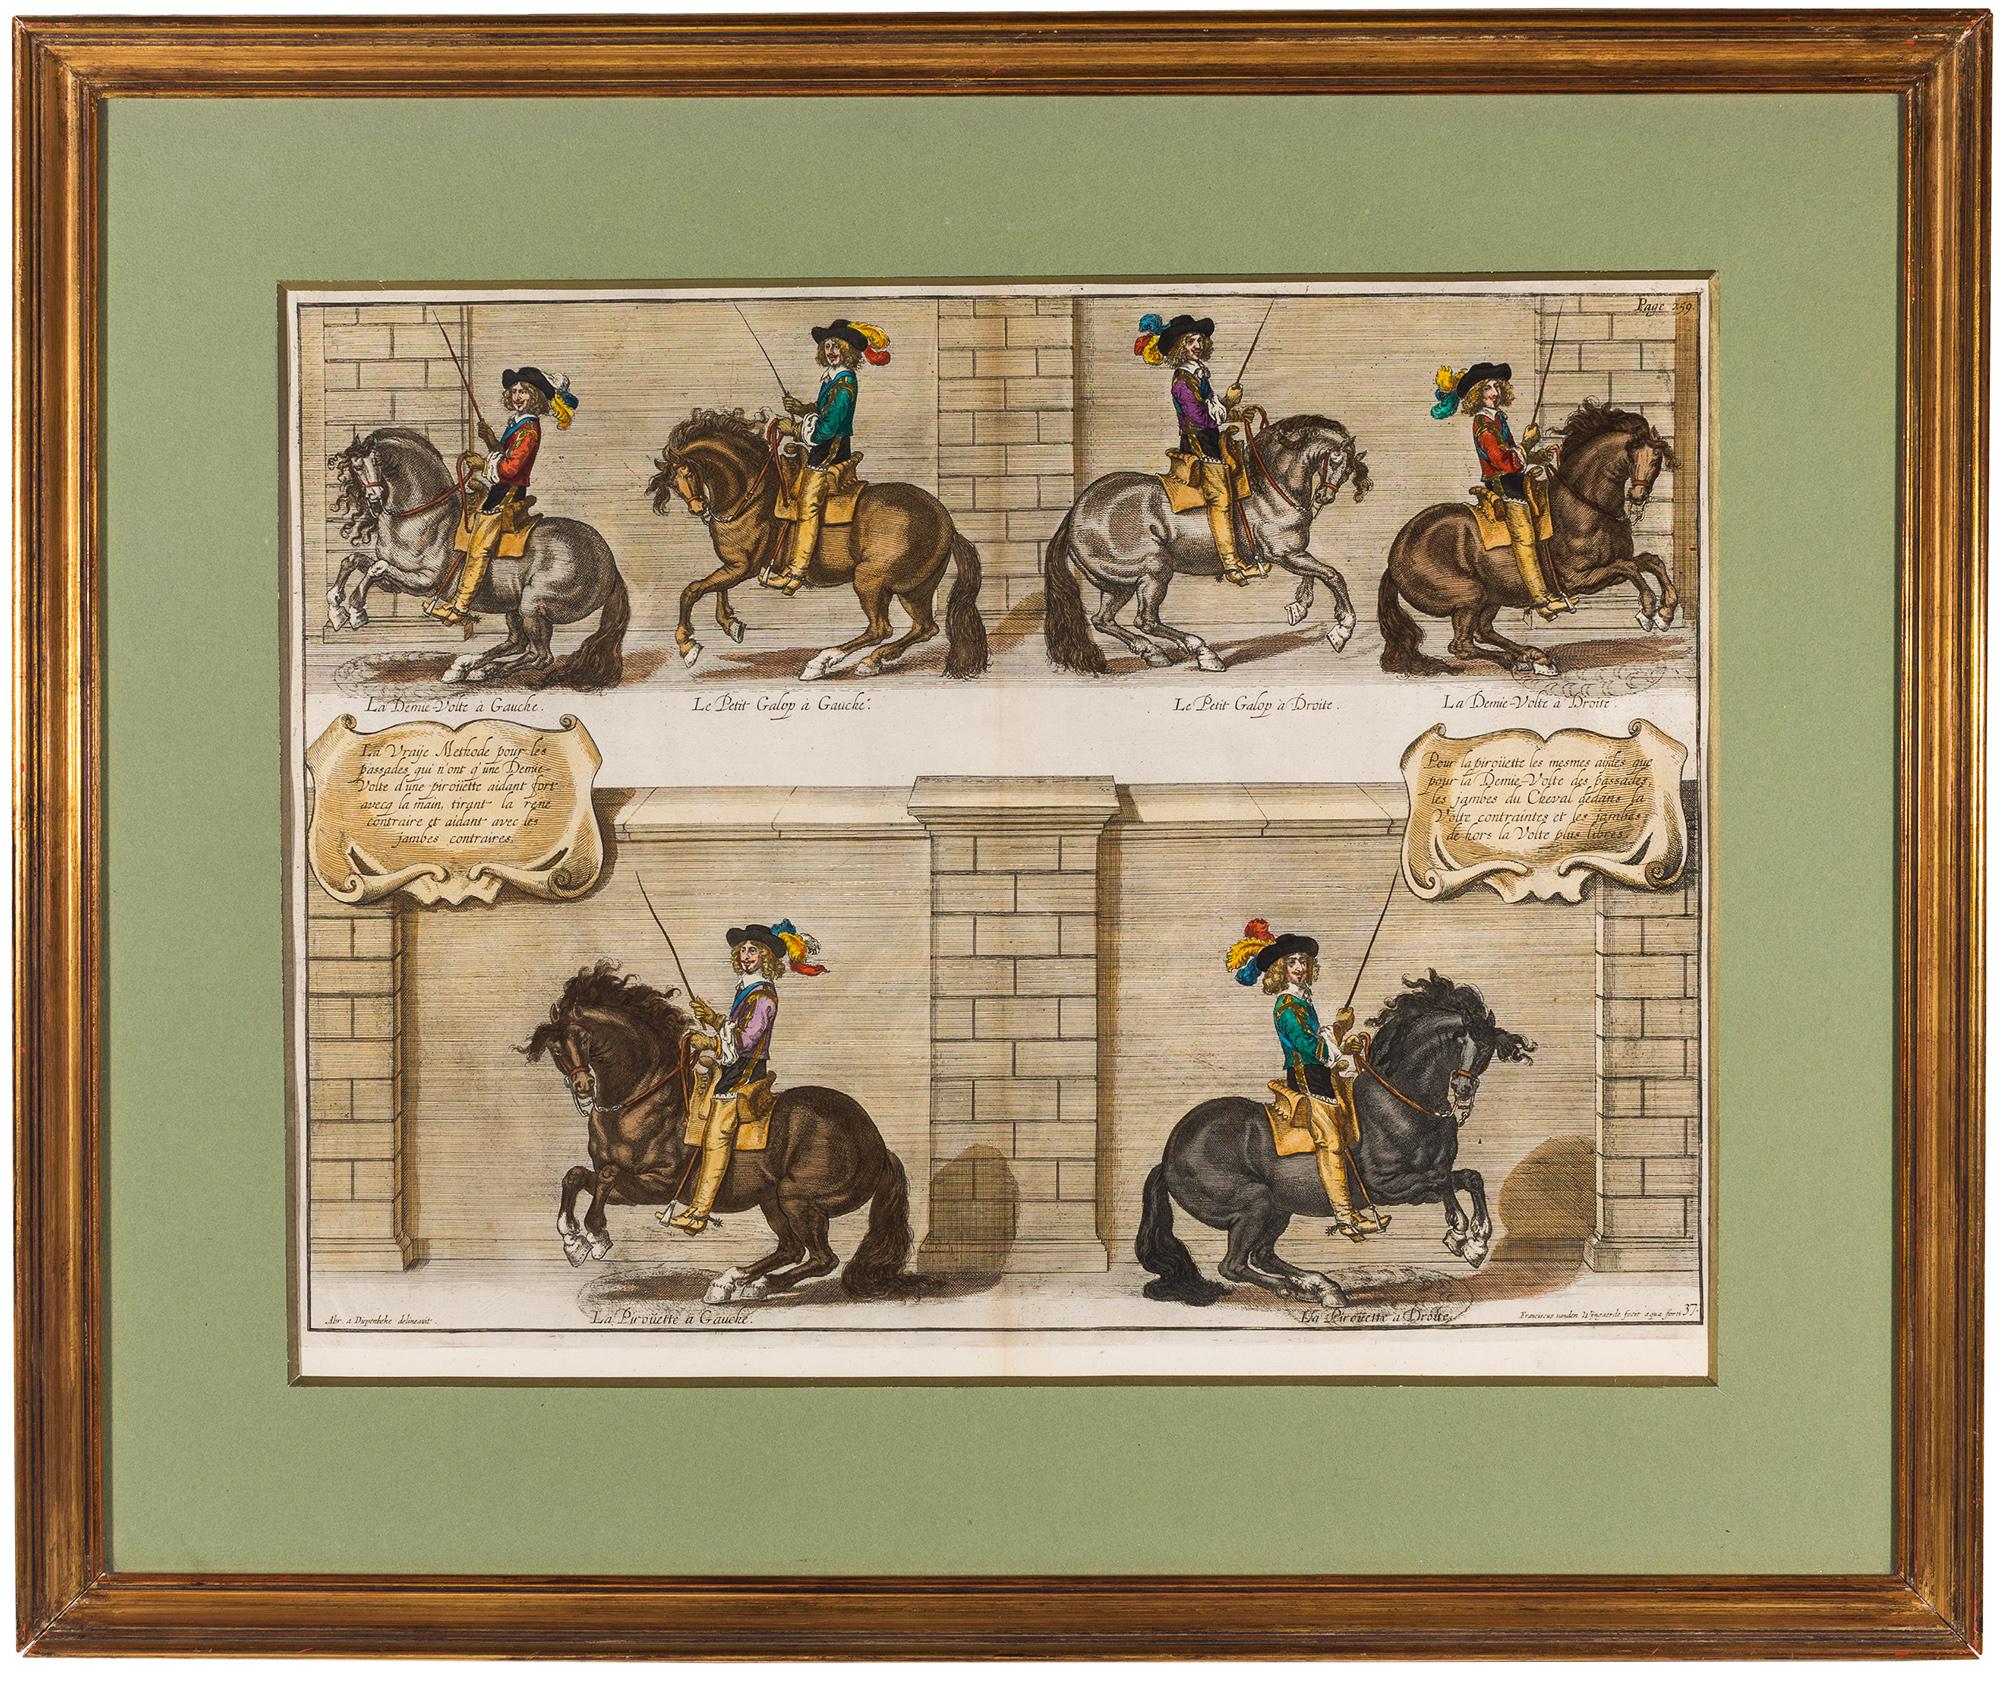 A beautiful set of six professionally framed, hand-colored copperplate engravings originally produced to illustrate the influential 17th century book 